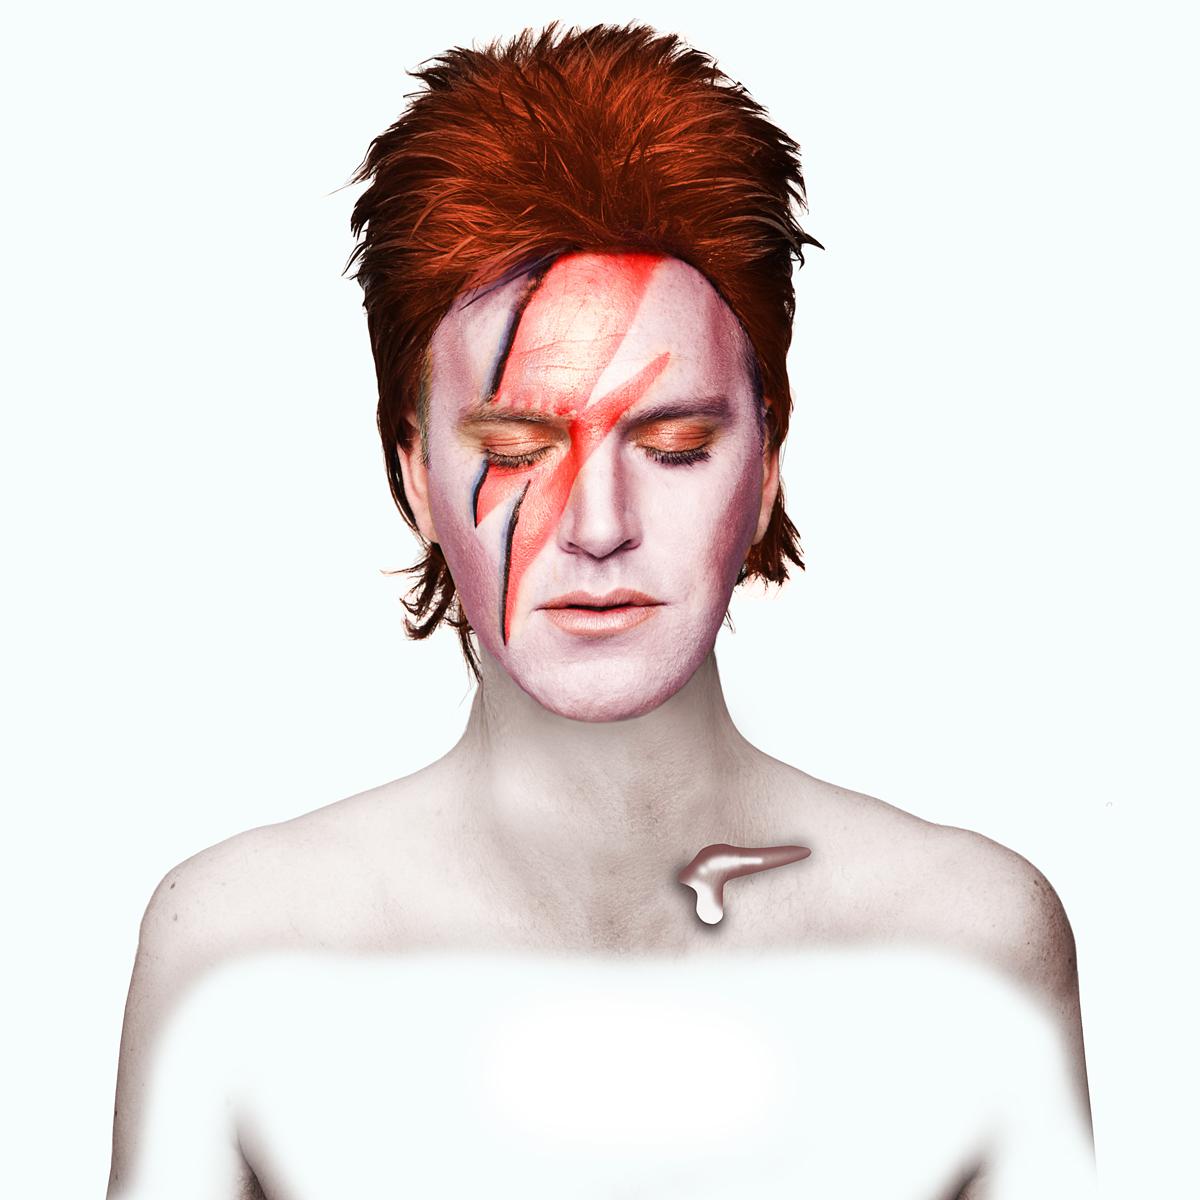 Not David Bowie by Julian Hanford for APA Annual Feature in Shots Magazine 2015